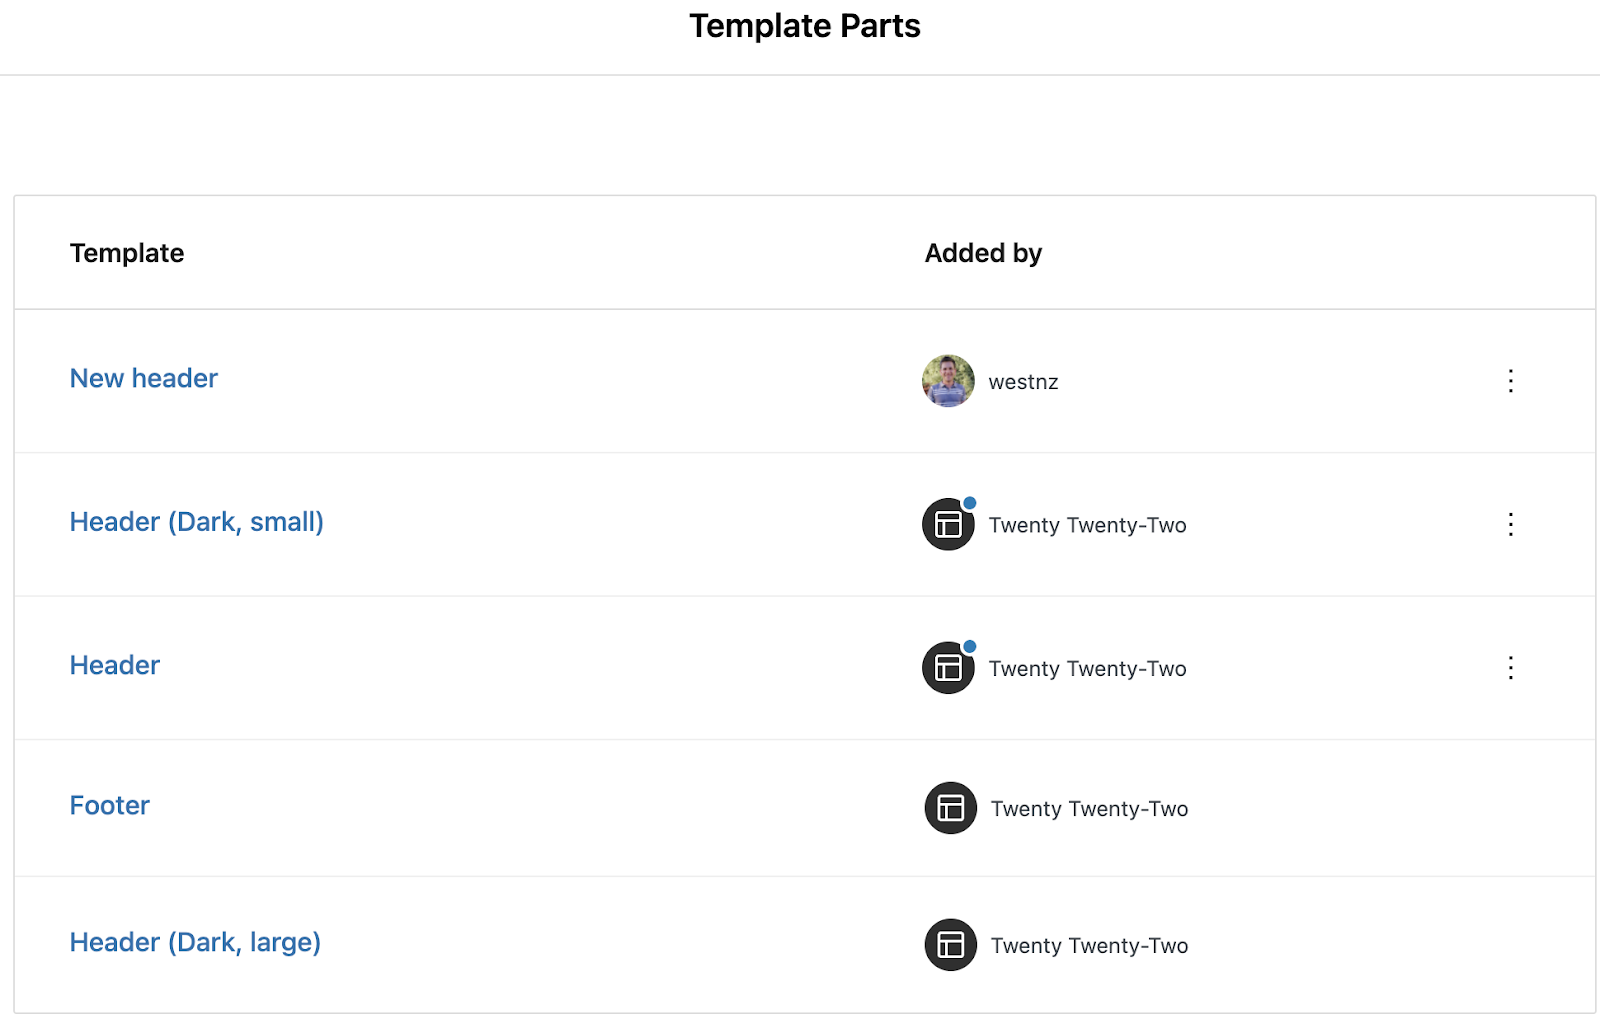 List of template parts.